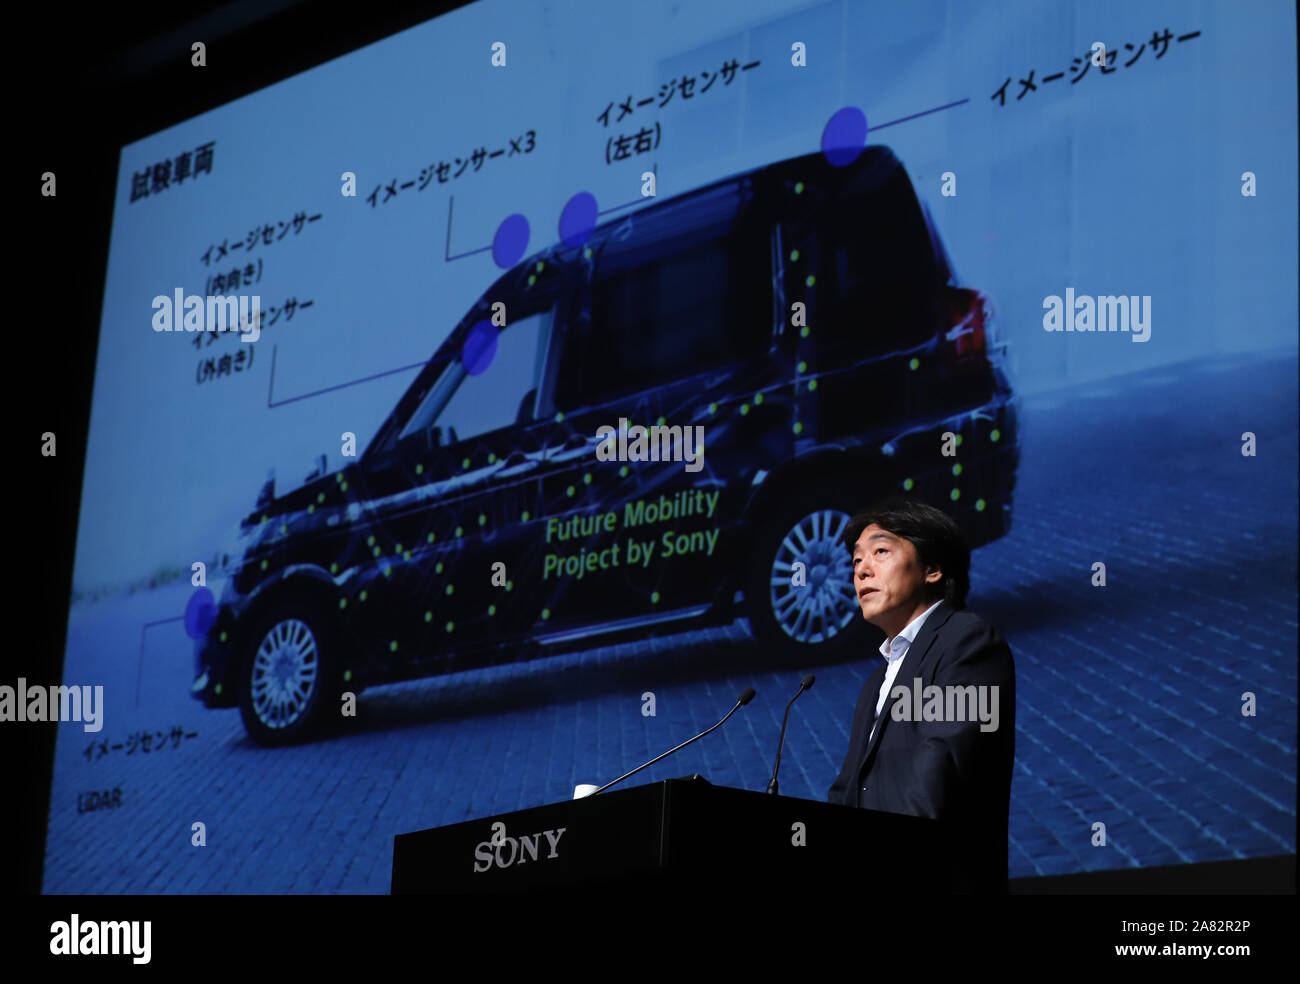 Tokyo, Japan. 5th Nov, 2019. Sony's executive officer Izumi Kawanishi announces they will provide taxi demand prediction service using Sony's AI and other technologies to taxi hailing service company Minnano Taxi, which is joint venture of Sony, taxi companies and others at Sony's headquarters in Tokyo on Tuesday, November 5, 2019. Sony already provided taxi dispatch app S.RIDE to the company. Credit: Yoshio Tsunoda/AFLO/Alamy Live News Stock Photo